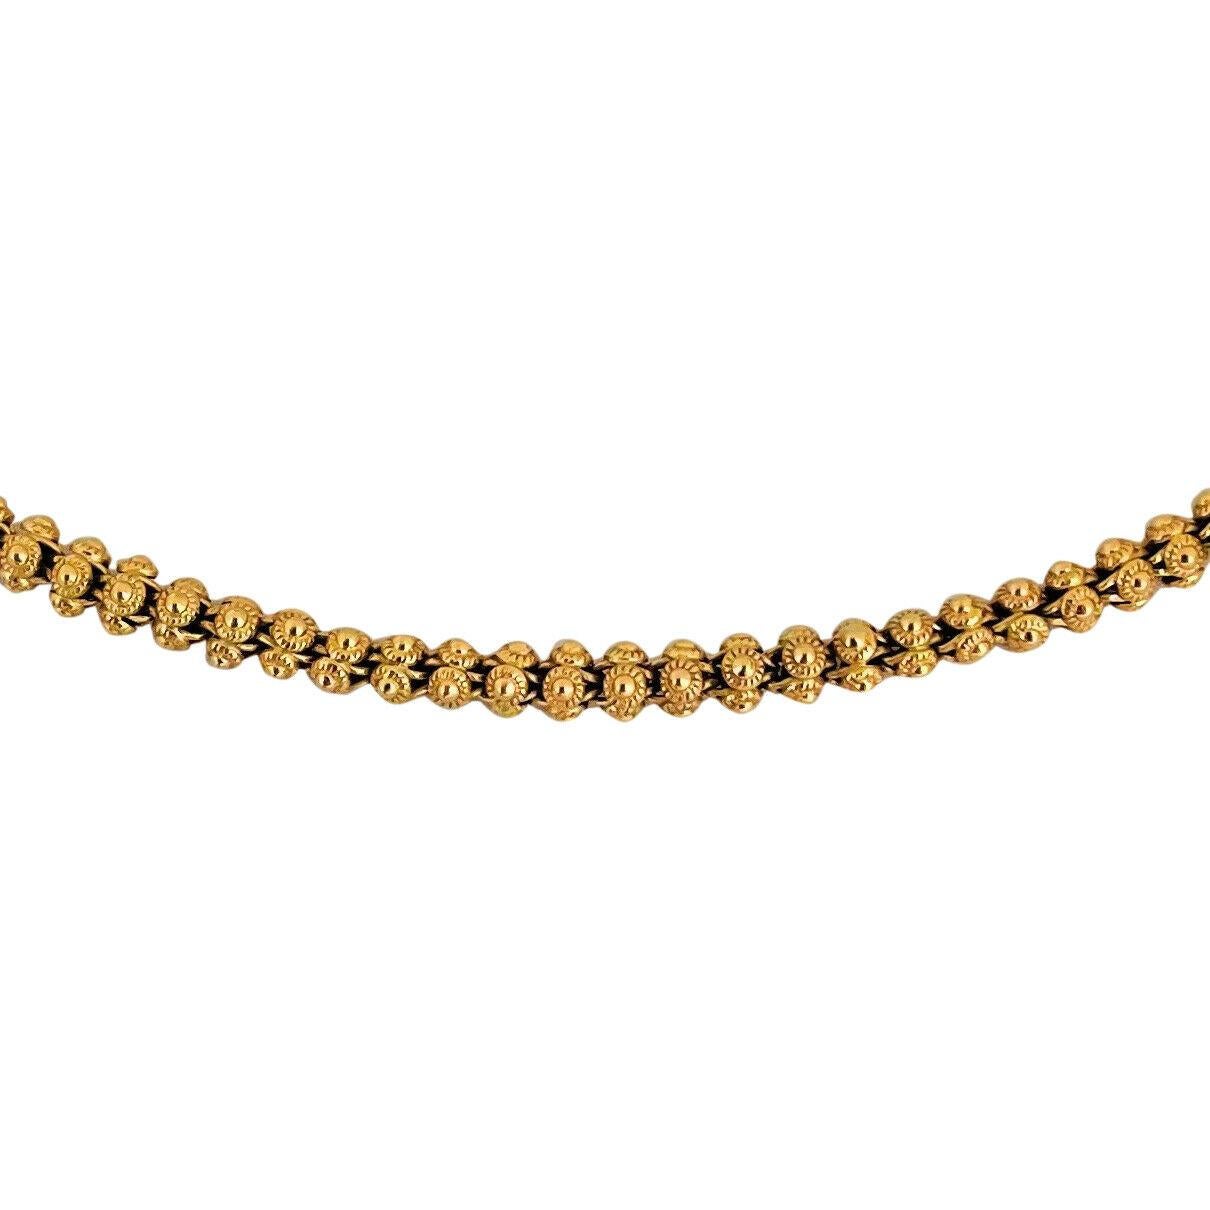 18k solid gold cuban chain 3 mm 28 in 24.9 grams / 18k solid yellow gold